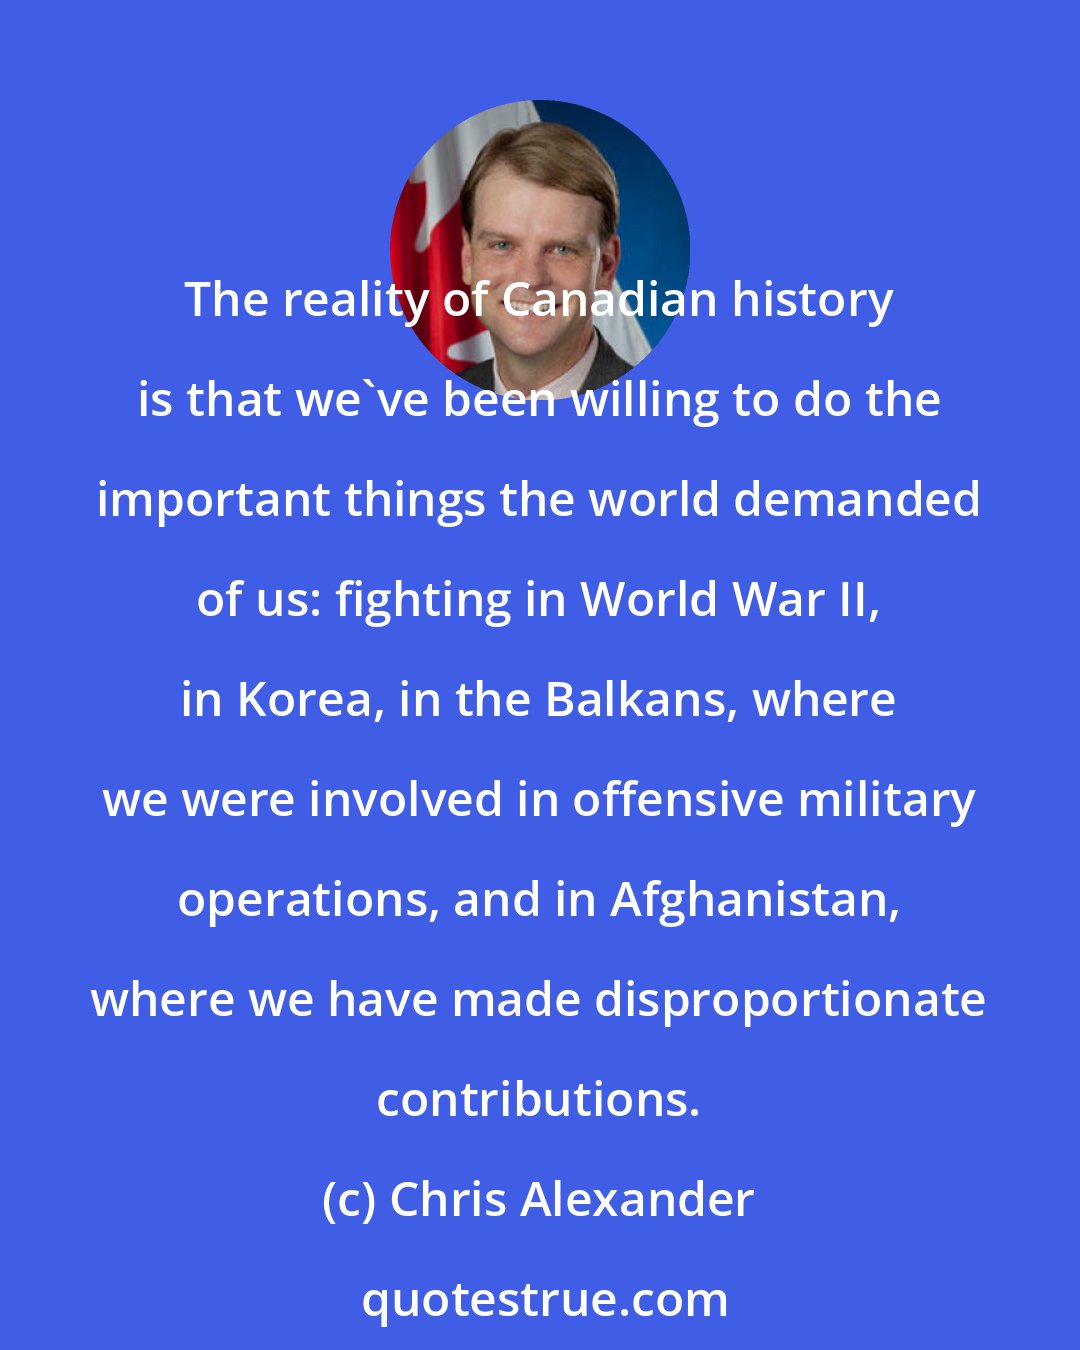 Chris Alexander: The reality of Canadian history is that we've been willing to do the important things the world demanded of us: fighting in World War II, in Korea, in the Balkans, where we were involved in offensive military operations, and in Afghanistan, where we have made disproportionate contributions.